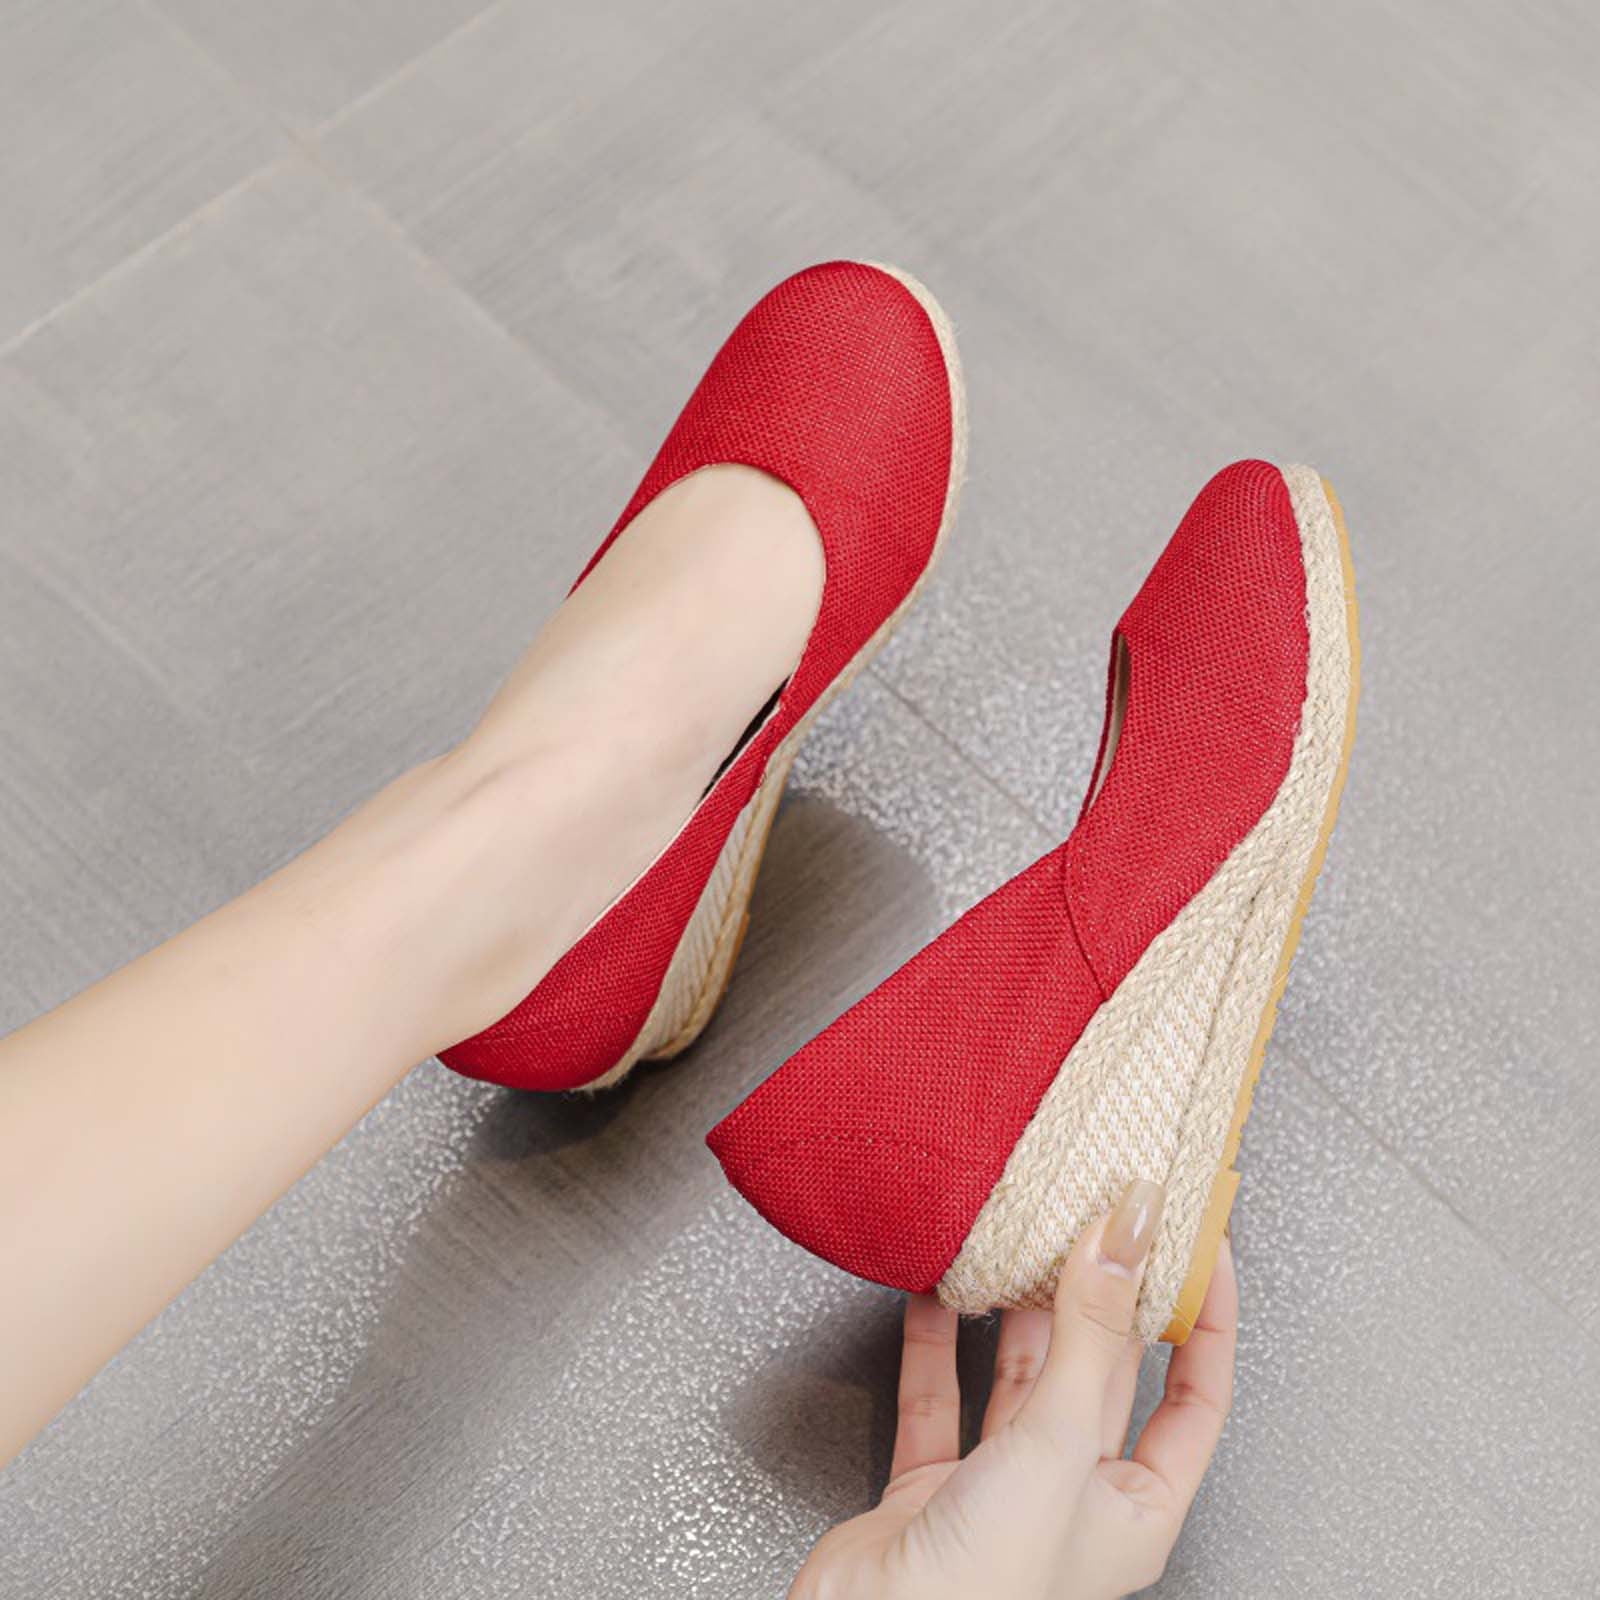 Sandals Women High Heels Female Wedges Shoes for Women Red